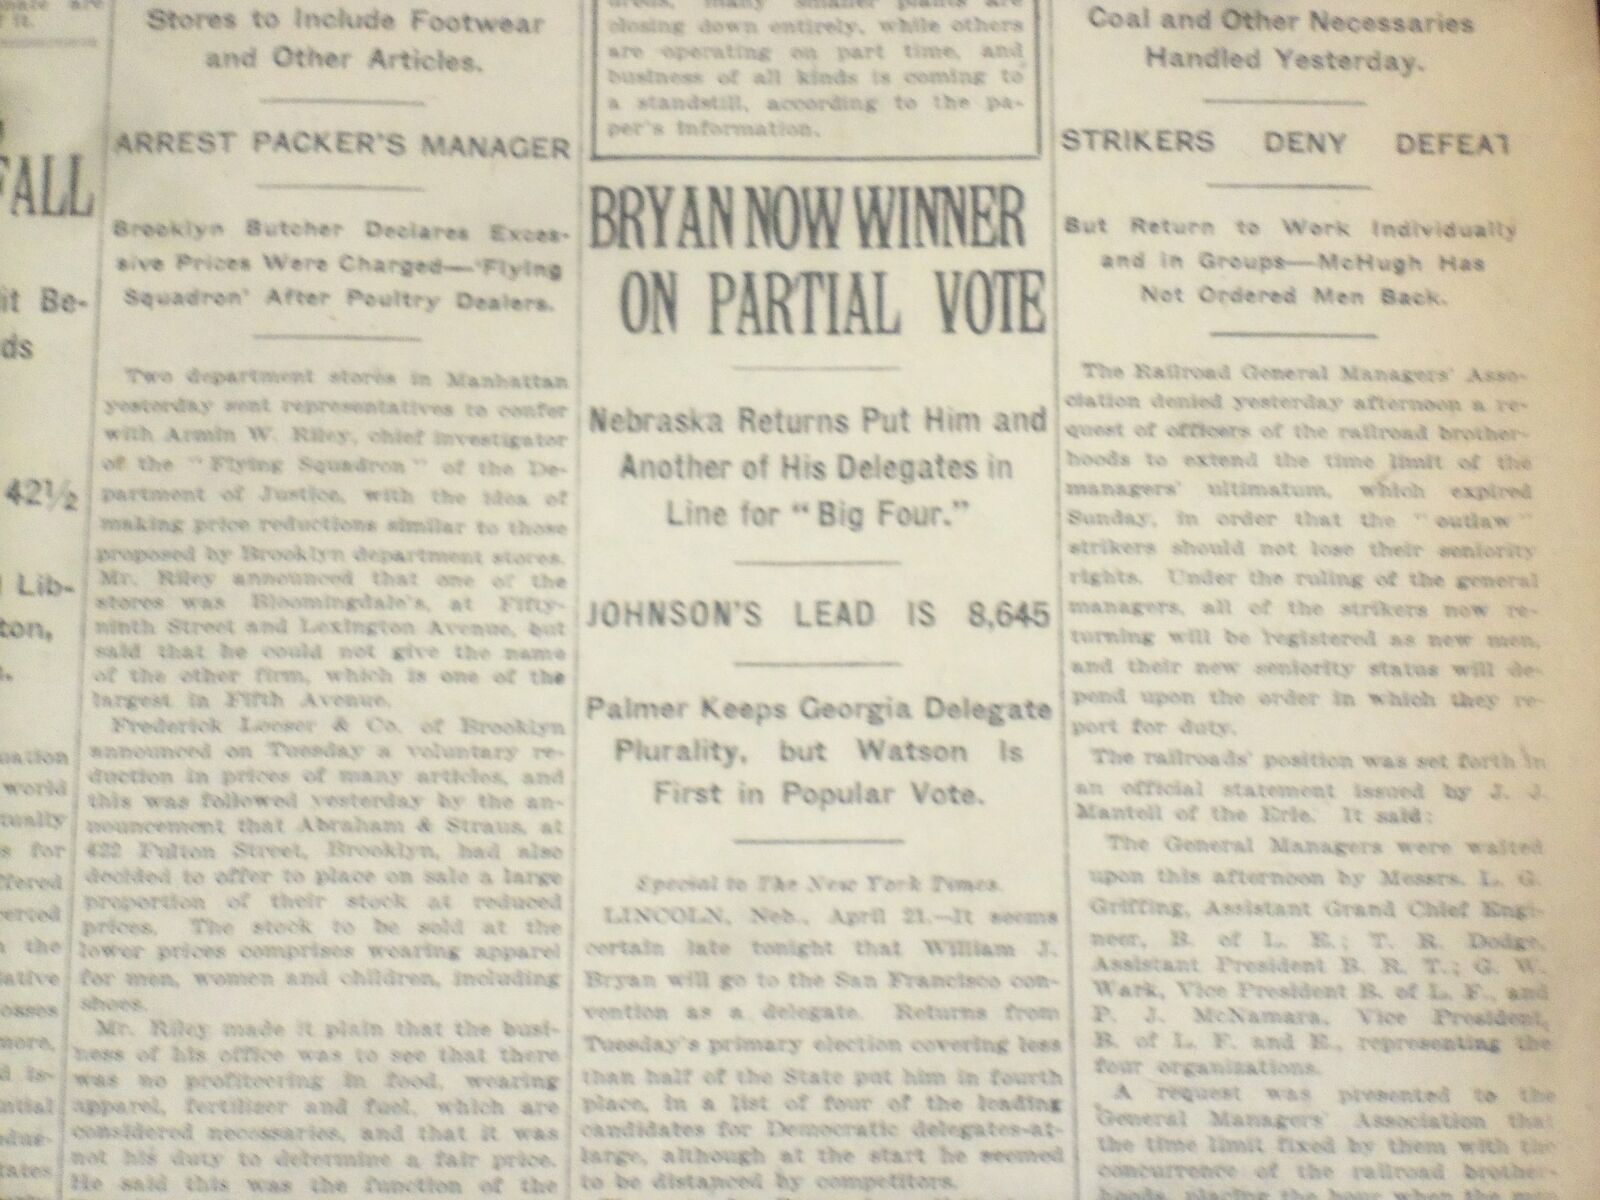 1920 APRIL 22 NEW YORK TIMES - BRYAN WINNER ON PARTIAL VOTE - NT 8297